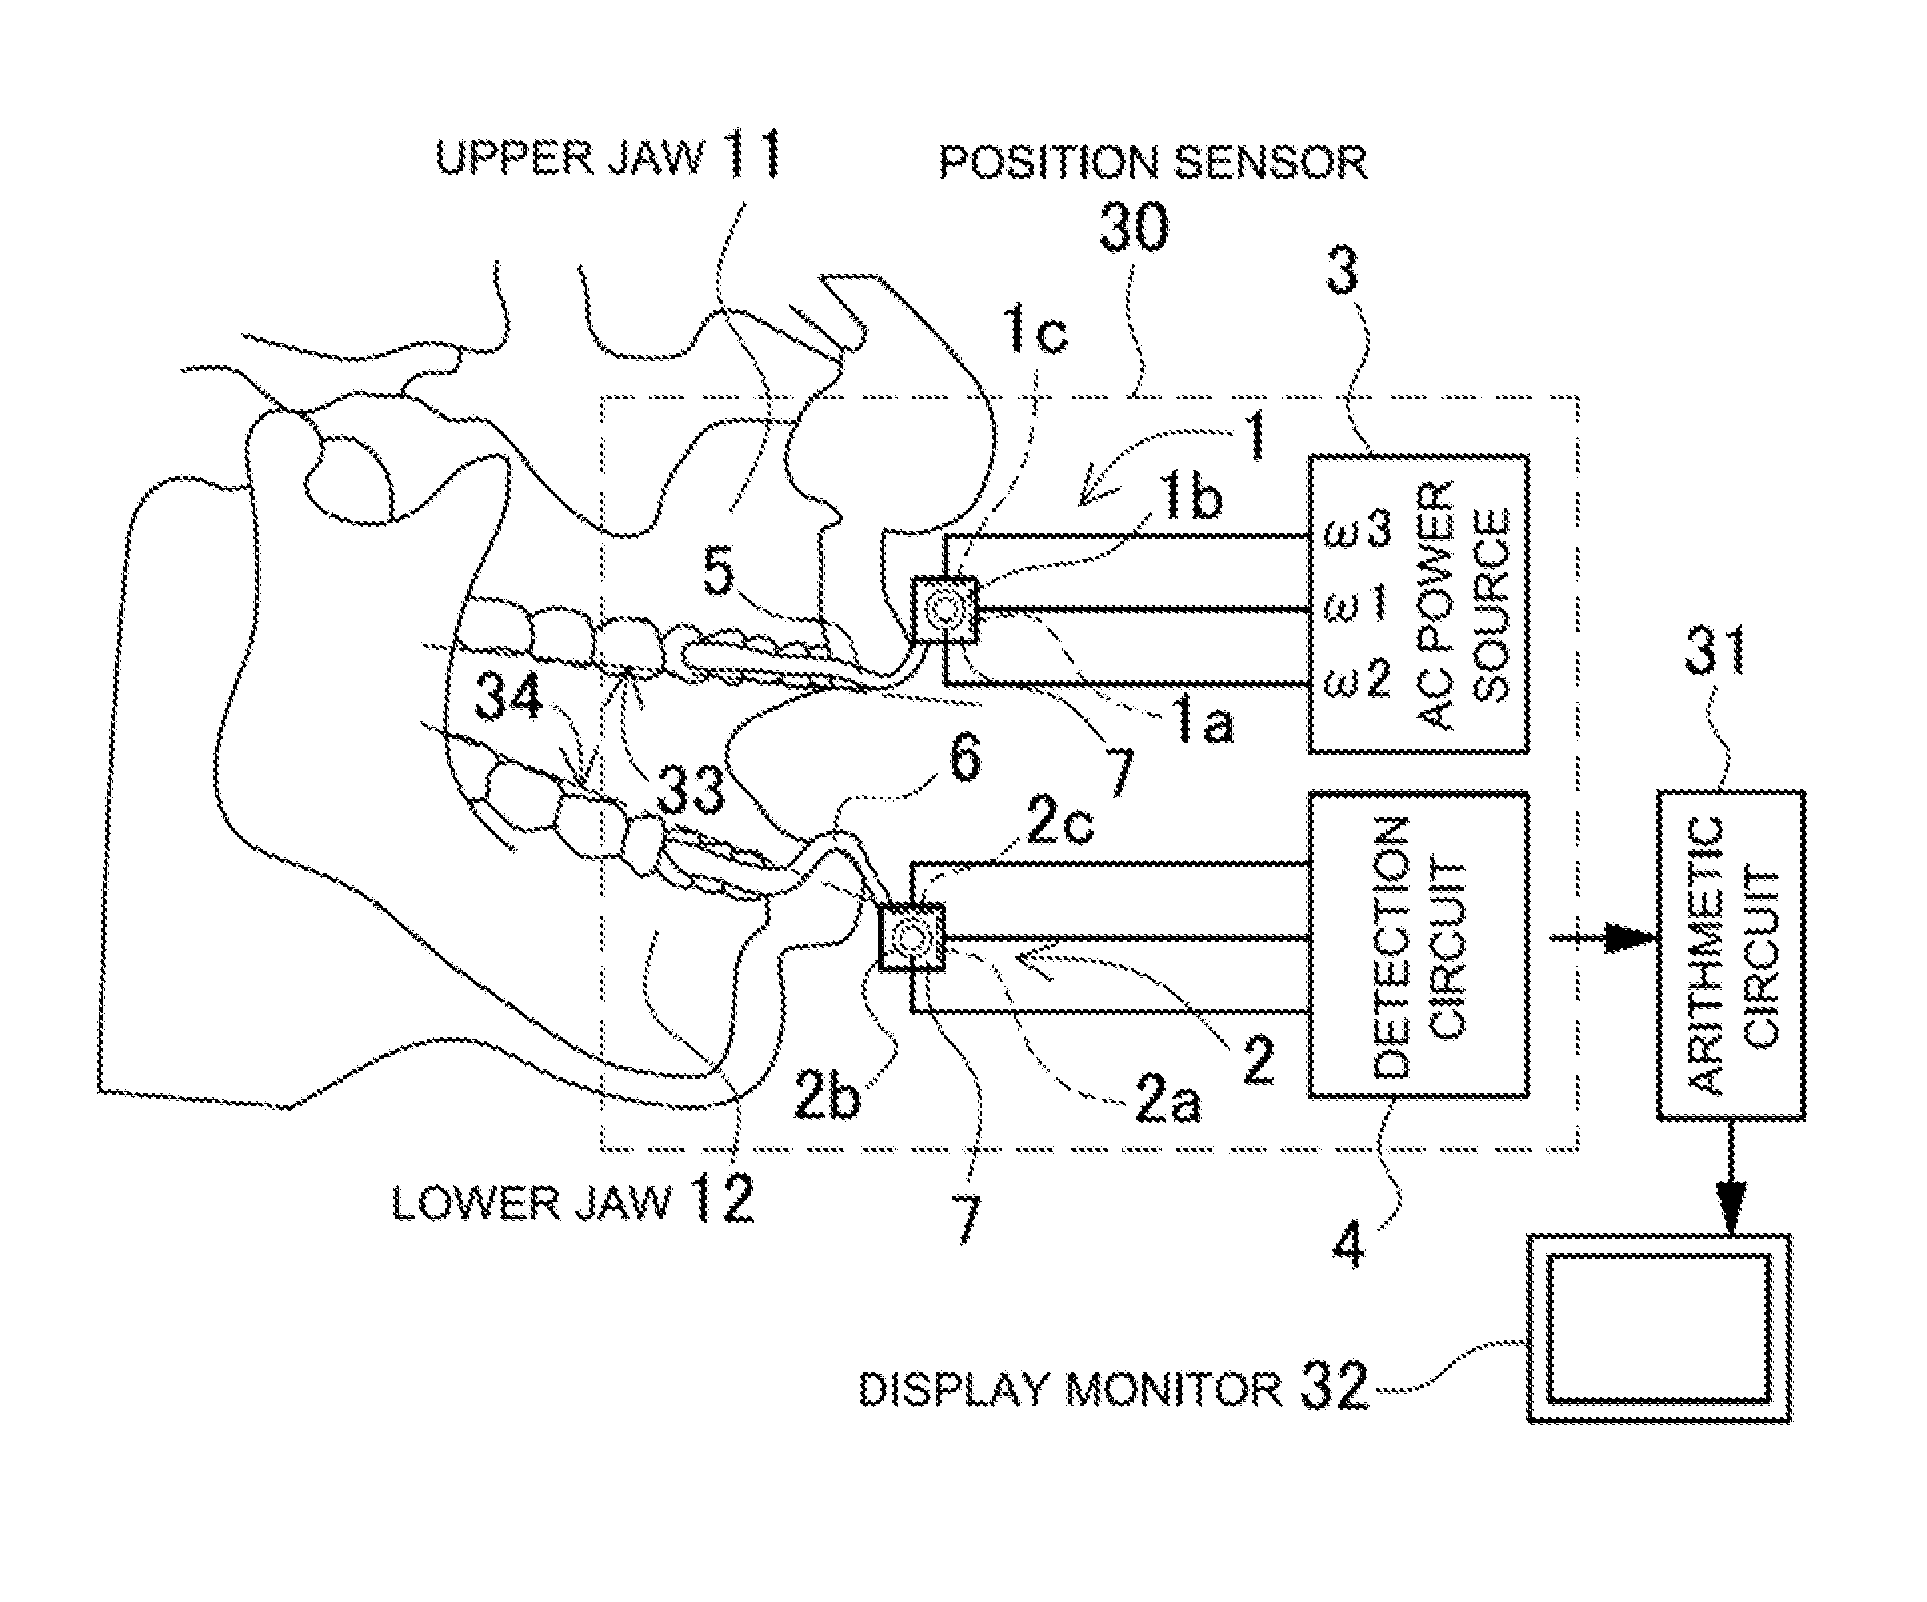 Apparatus for measuring dental occlusion